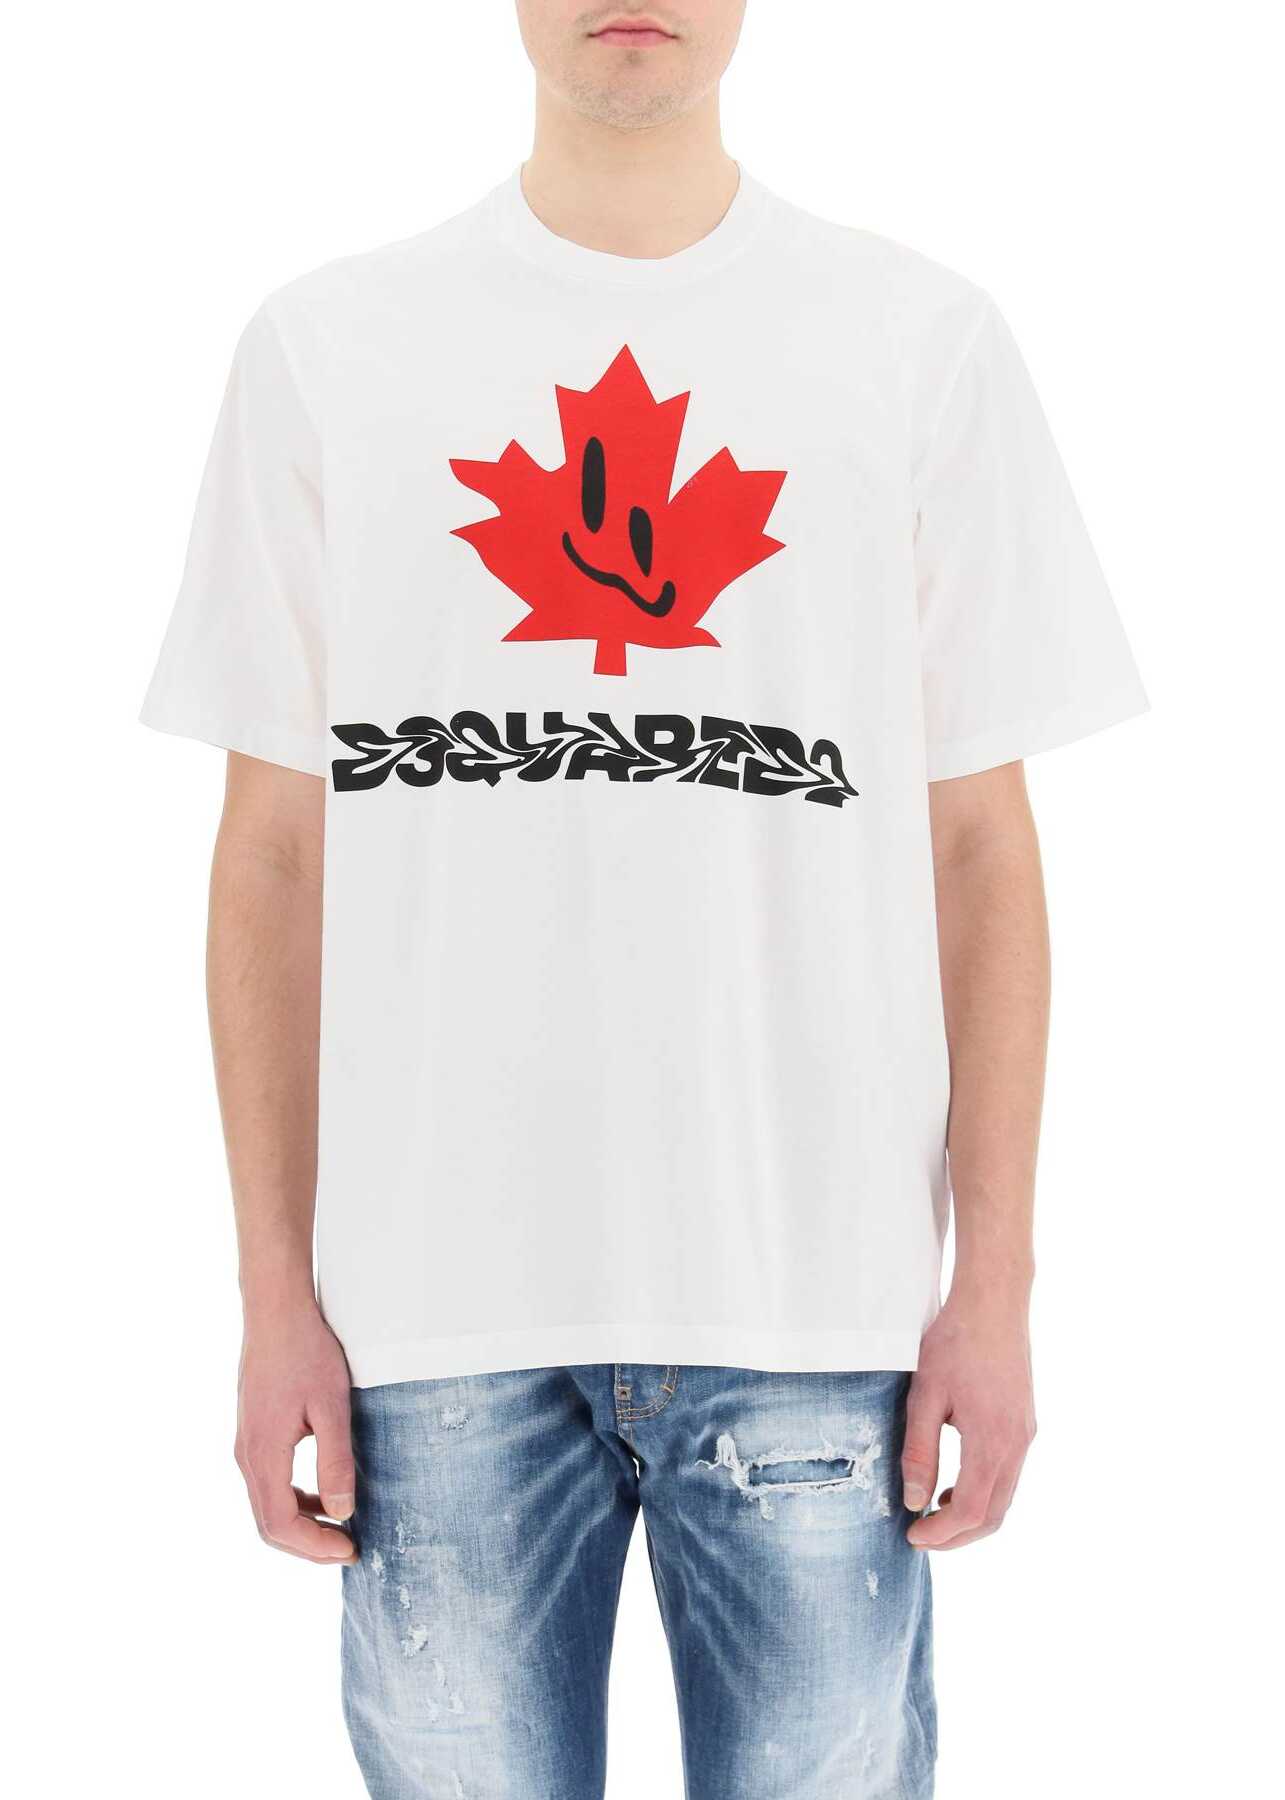 DSQUARED2 \'Smiling Leaf\' T-Shirt S74GD0928 S23009 WHITE